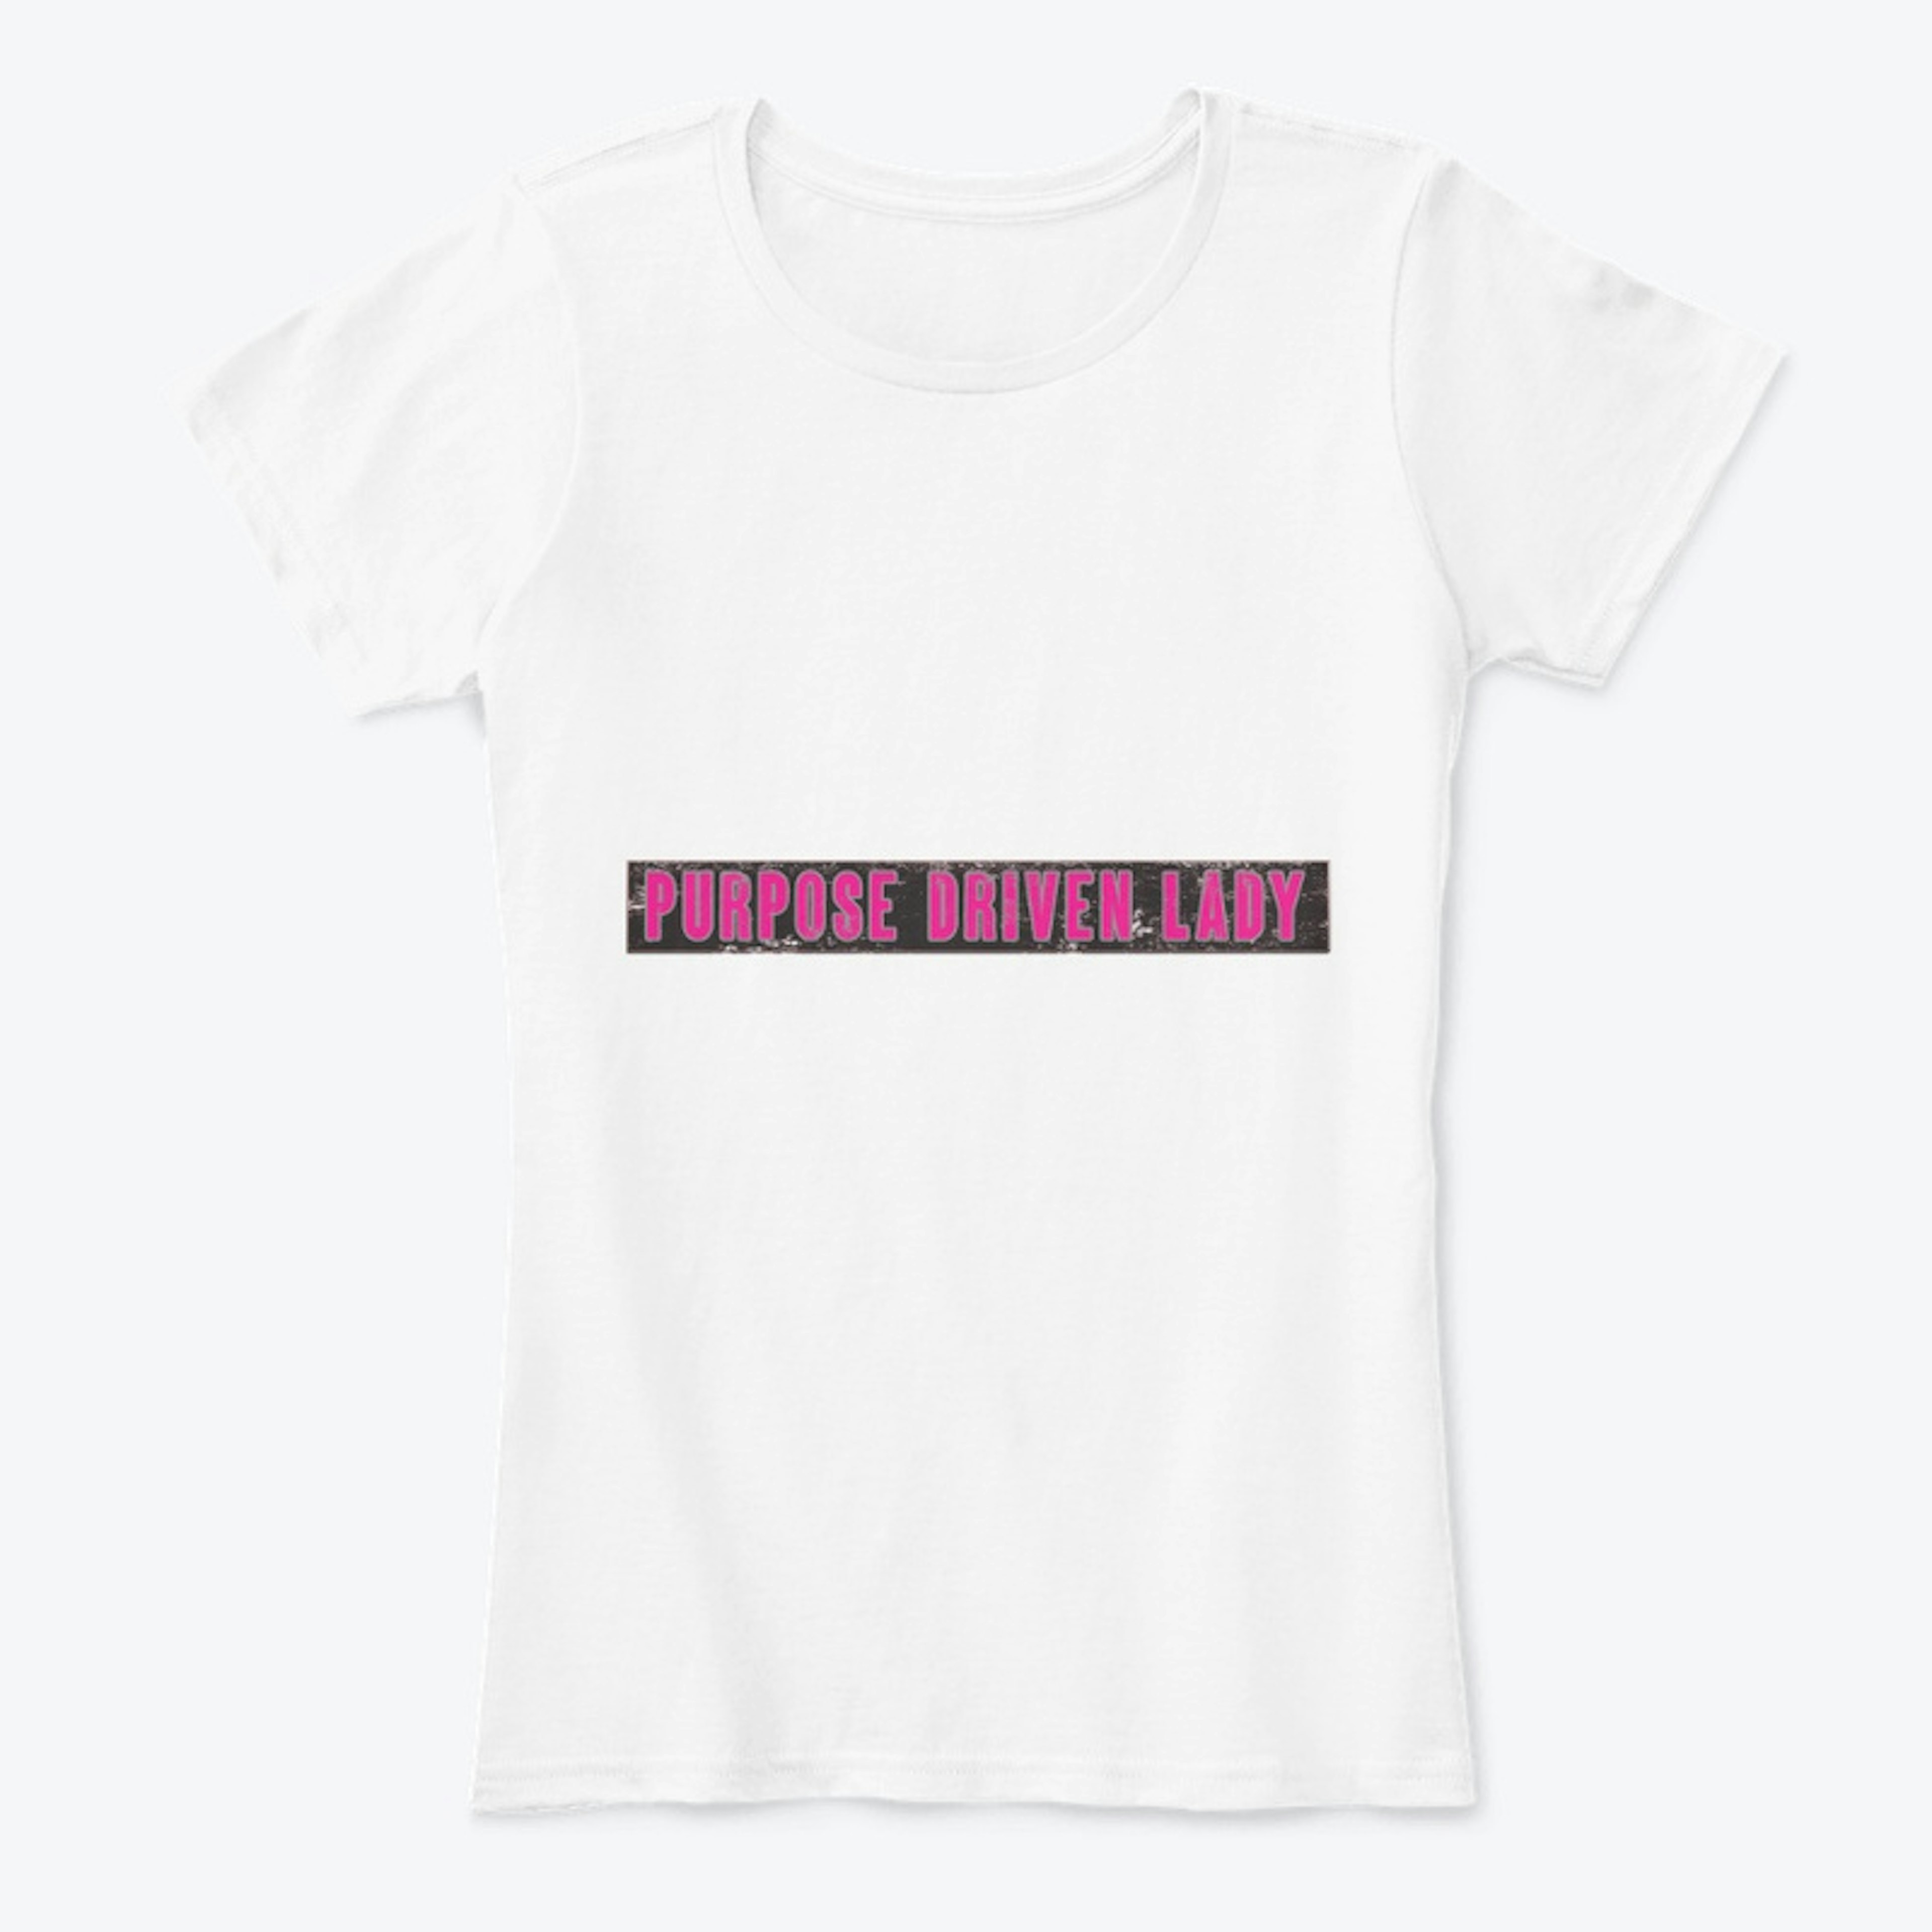 Purpose Driven Lady Pink & Blk Banner 